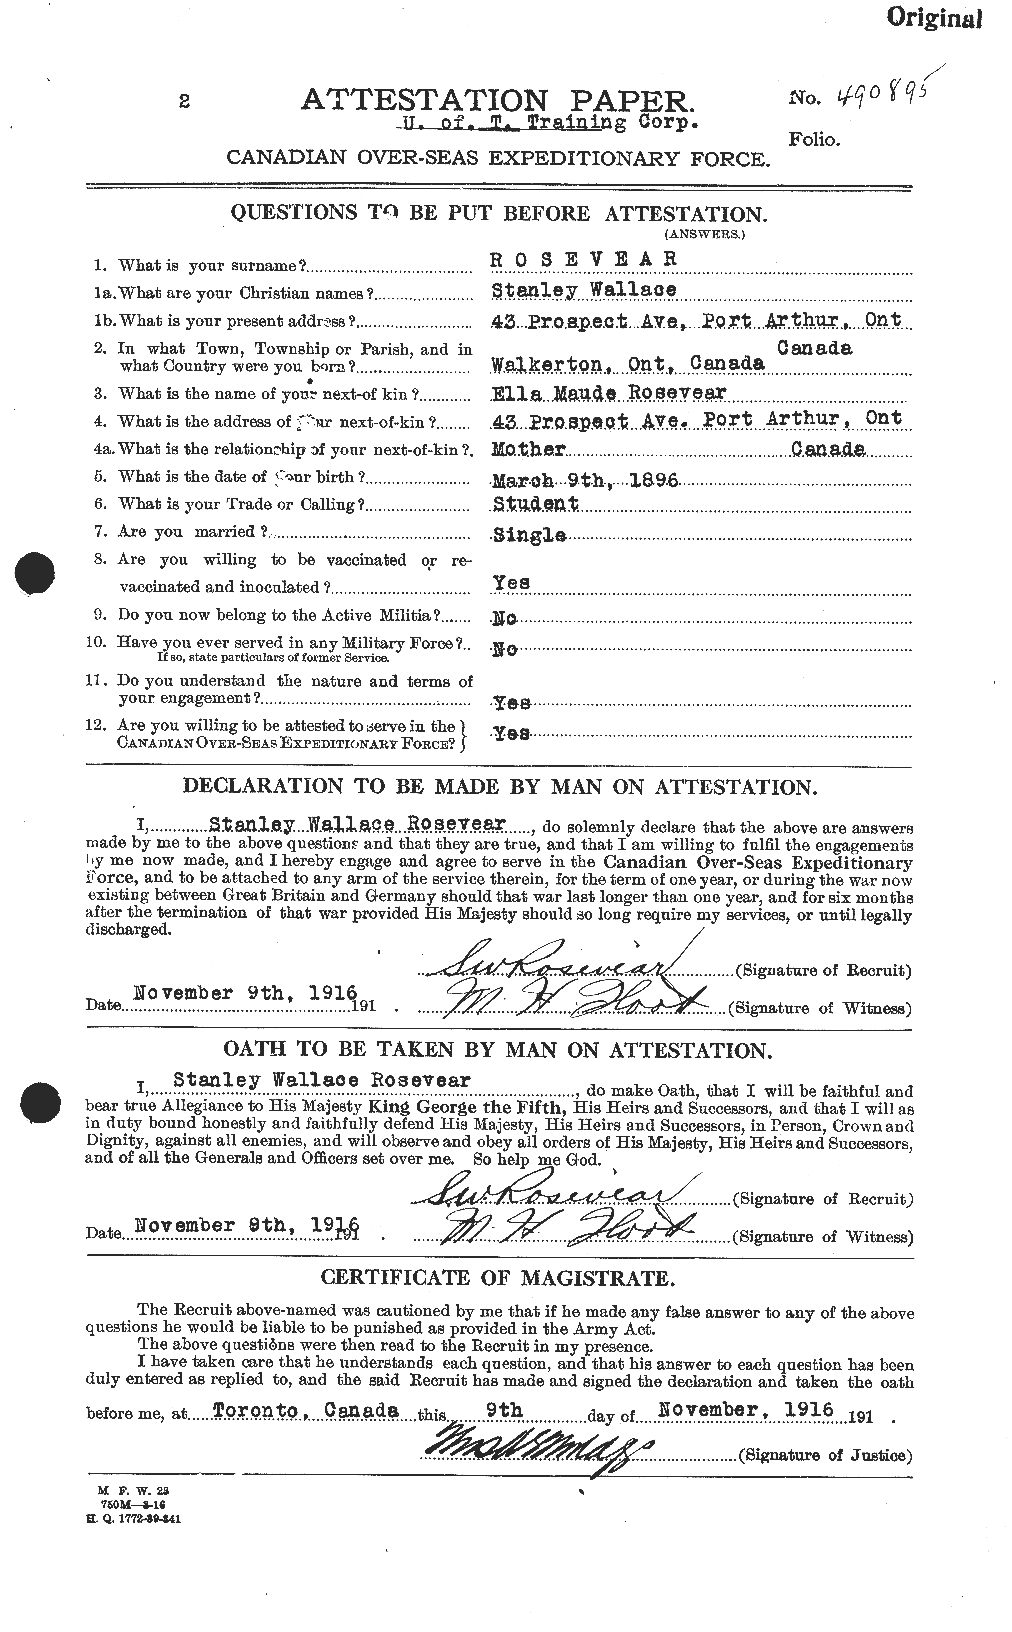 Personnel Records of the First World War - CEF 611288a